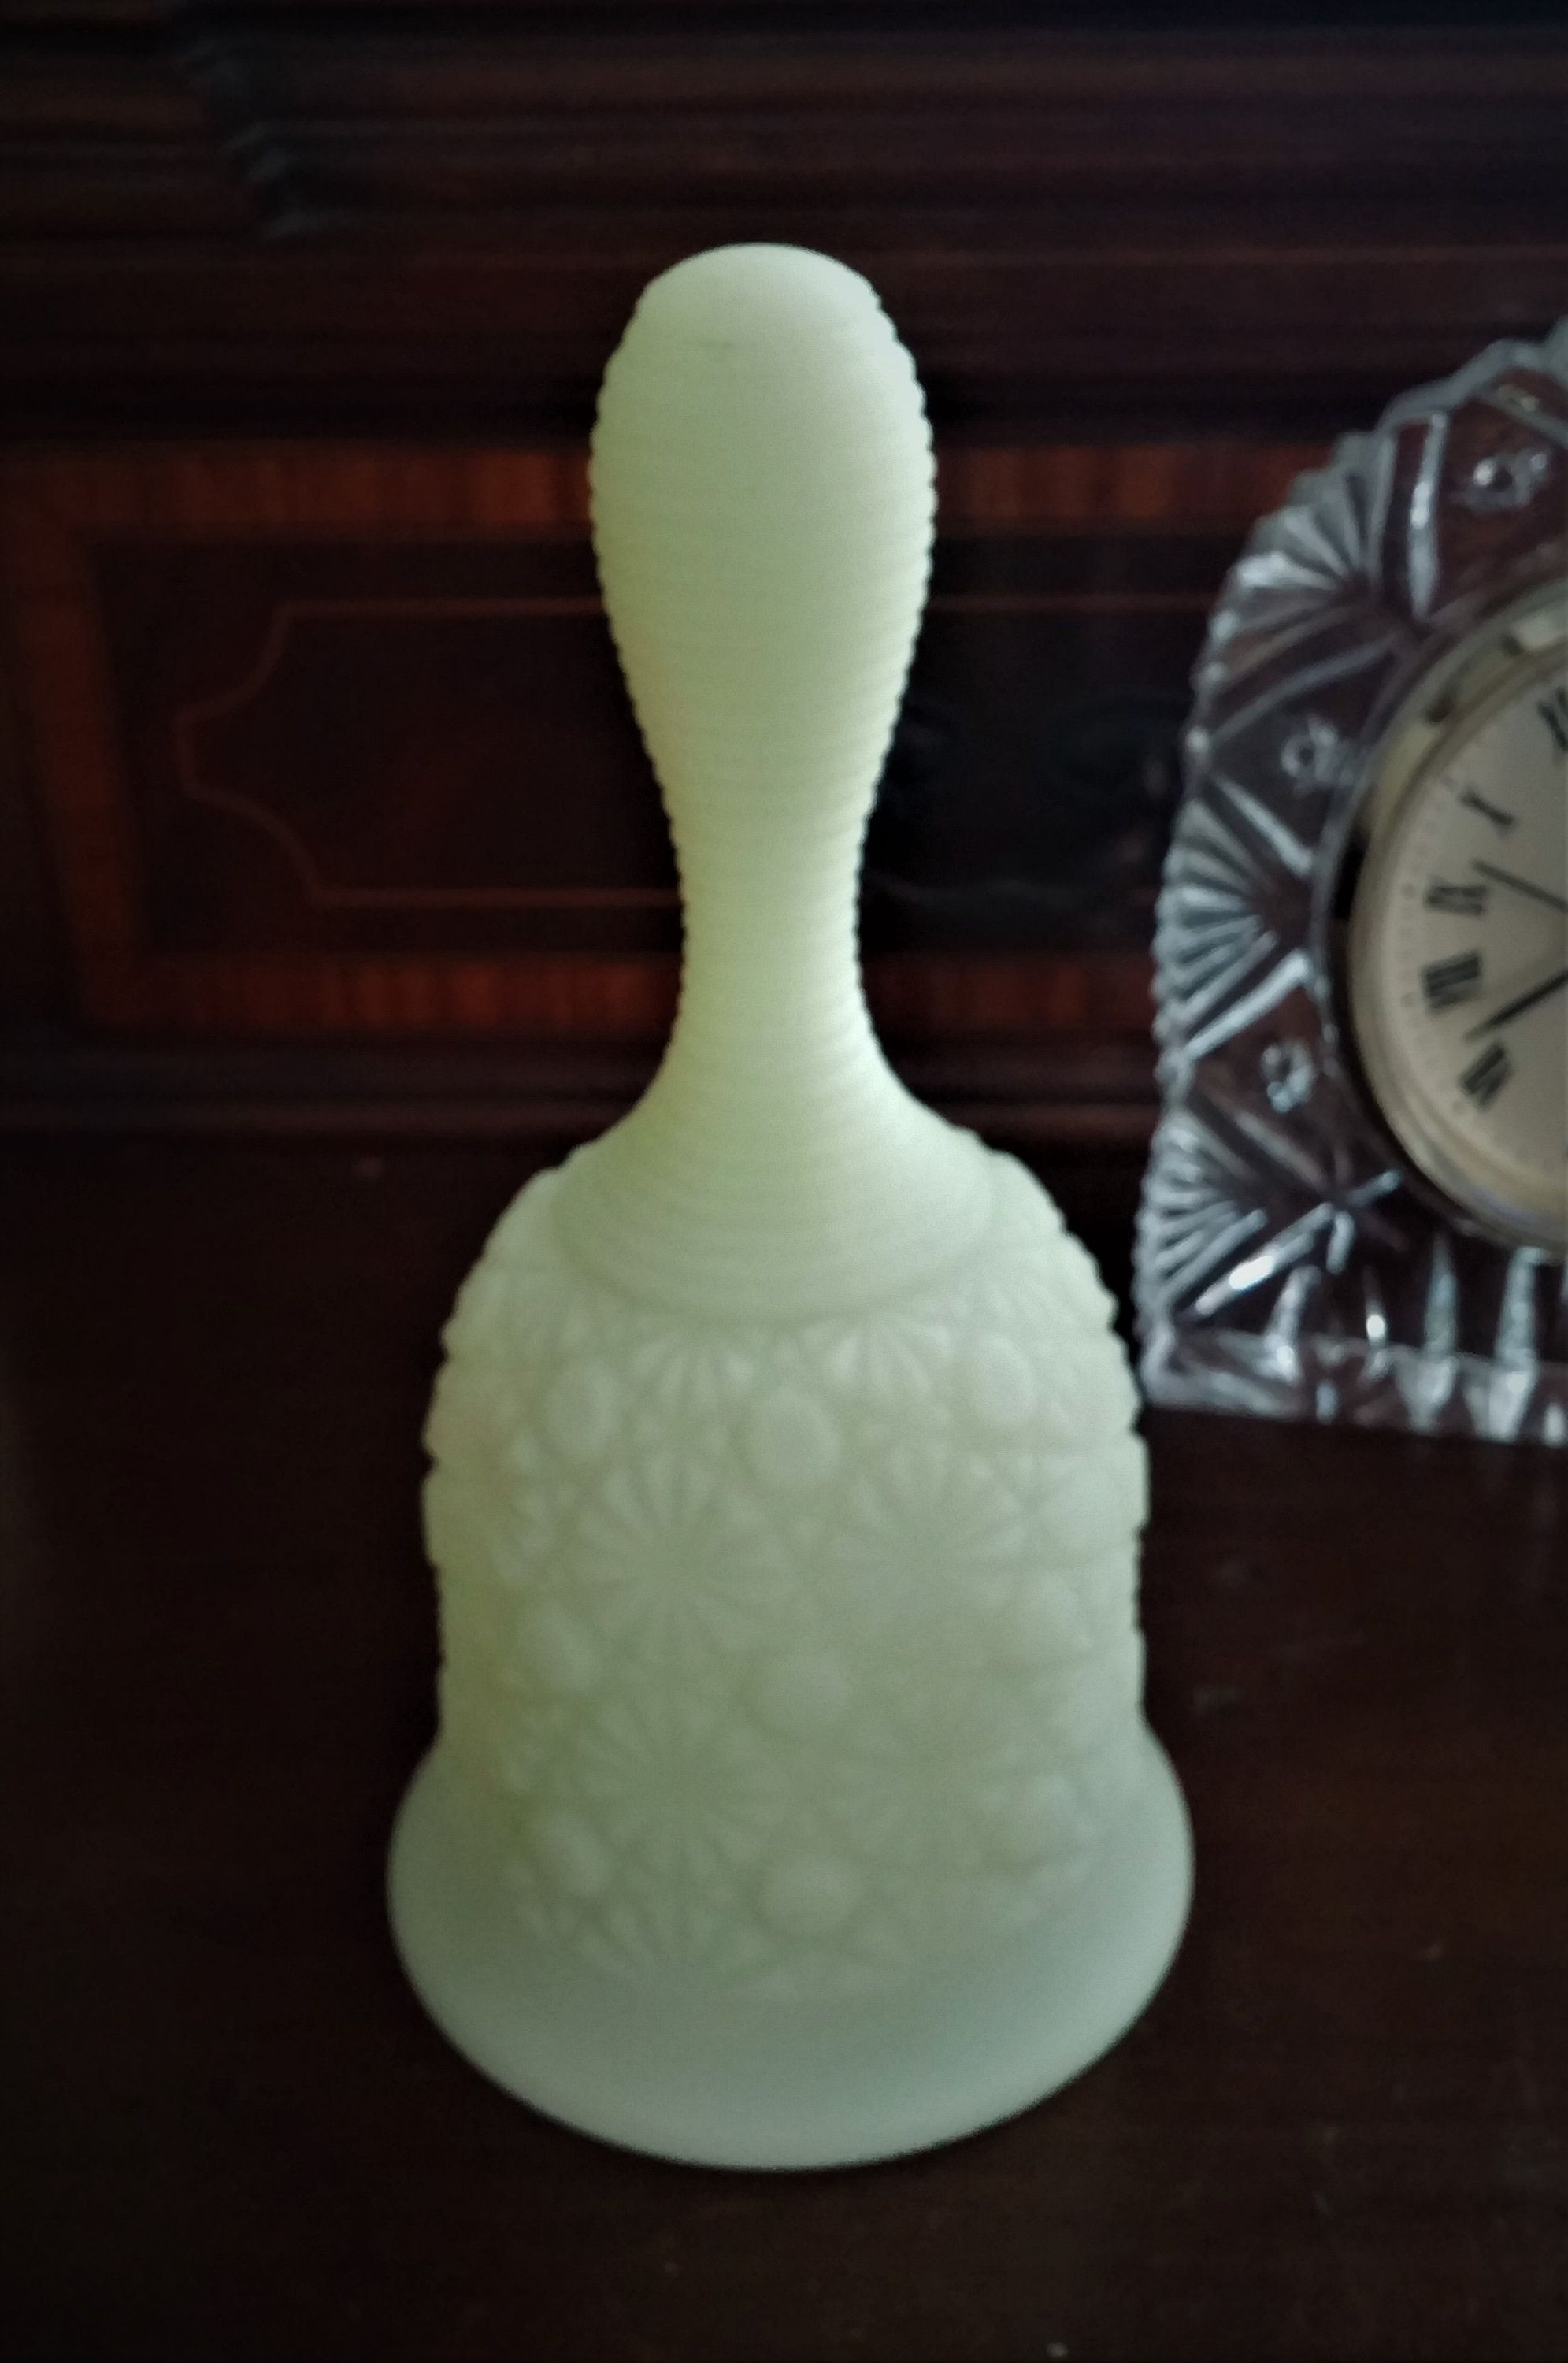 20 Perfect norleans Vase Made In Italy 2024 free download norleans vase made in italy of vintage fenton vaseline bell custard glass illumination glass with vintage fenton vaseline bell custard glass illumination glass bell satin glass daisey and bu